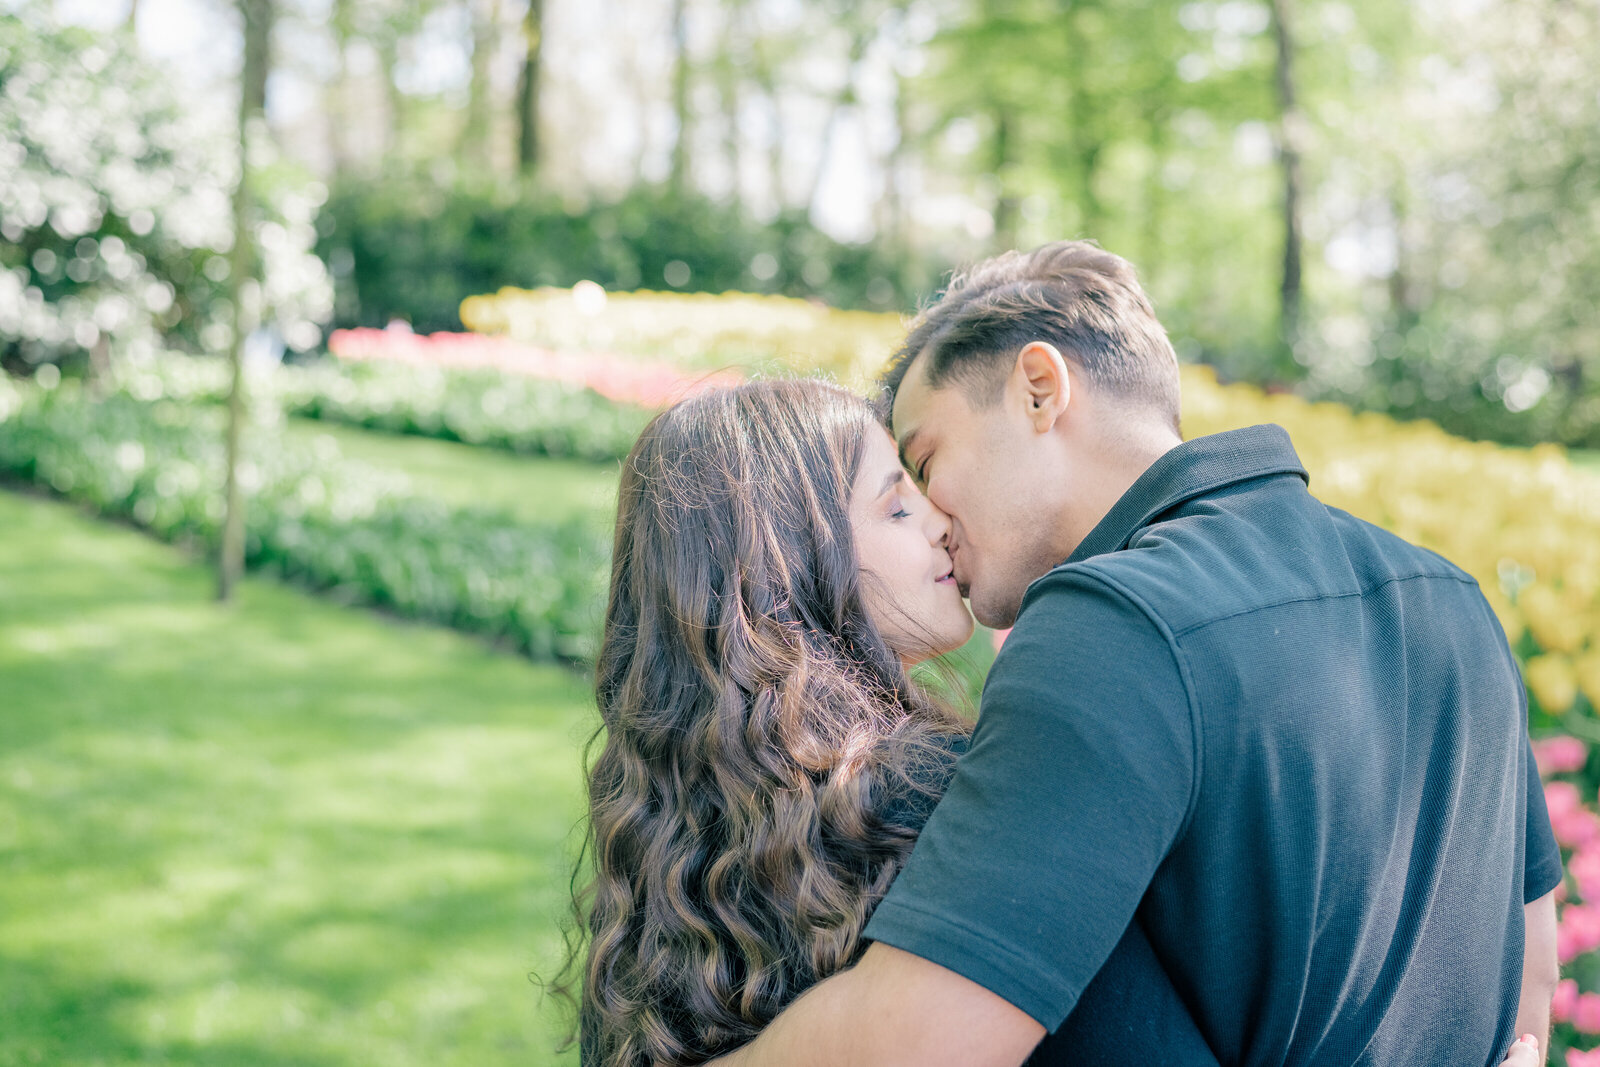 Monique and Carlos share a kiss in the Keukenhof during their anniversary photoshoot